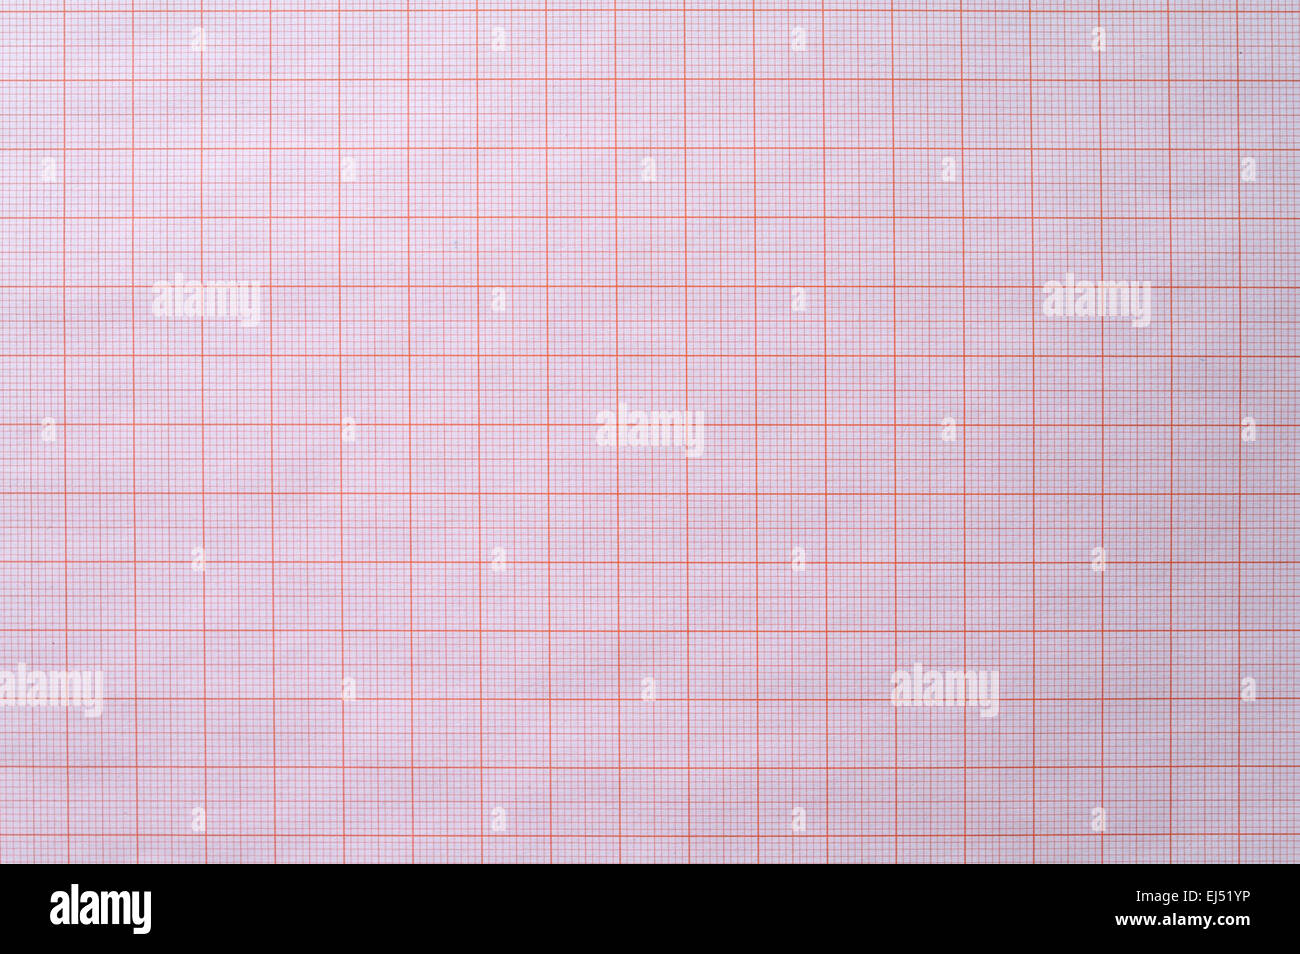 Graph paper background Stock Photo